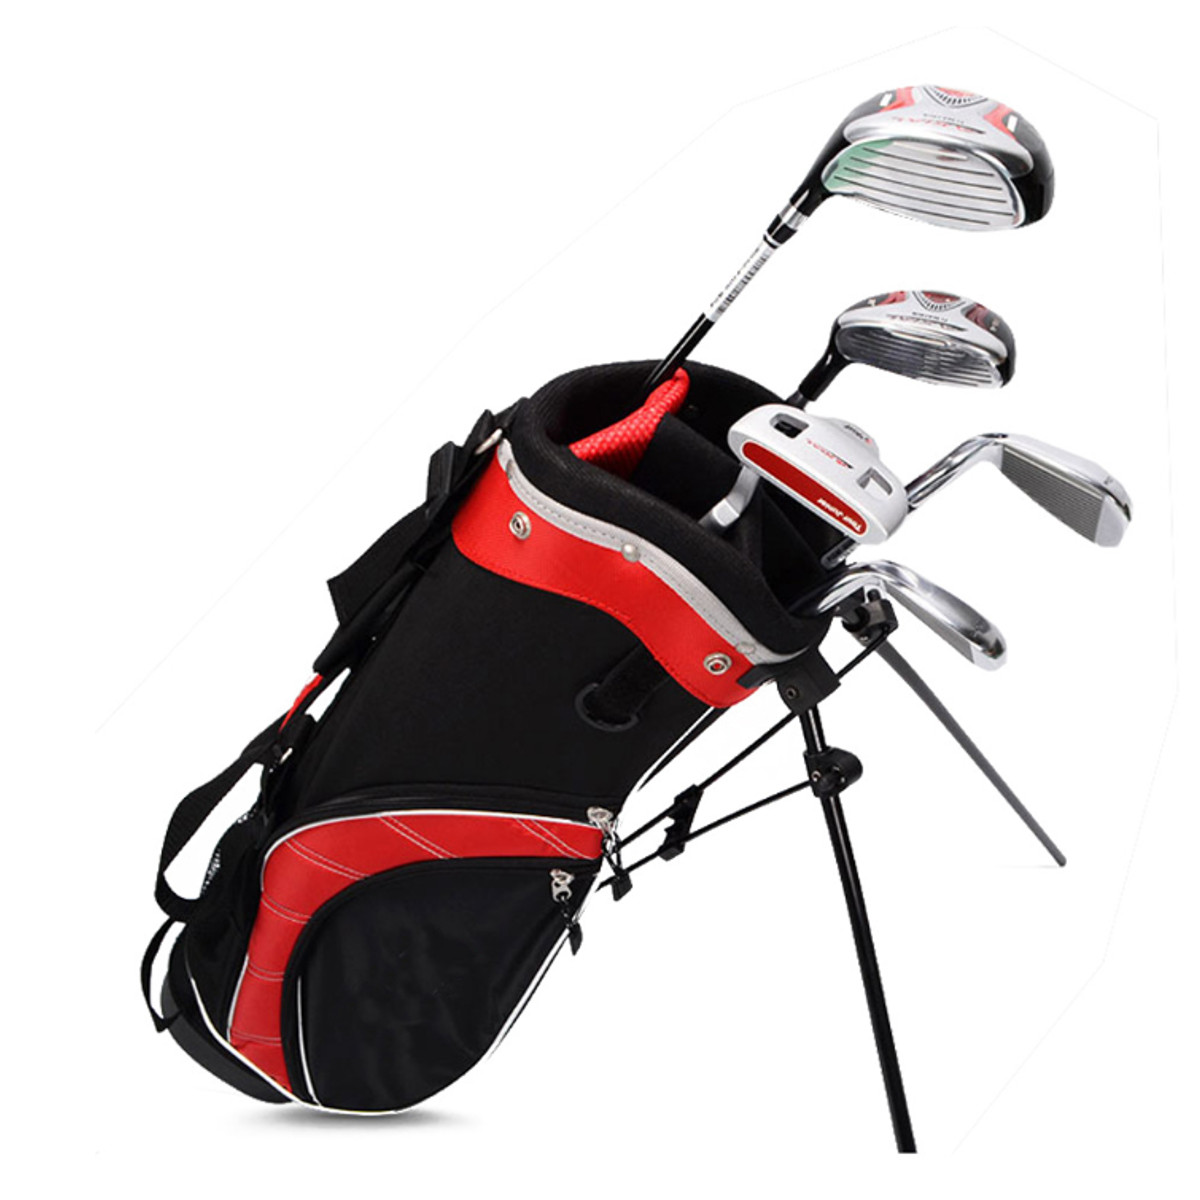 Childrens-Golf-Bag-Golf-Support-Ultra-Light-Stand-Portable-Large-Capacity-Double-Shoulder-Strap-For--1810143-3